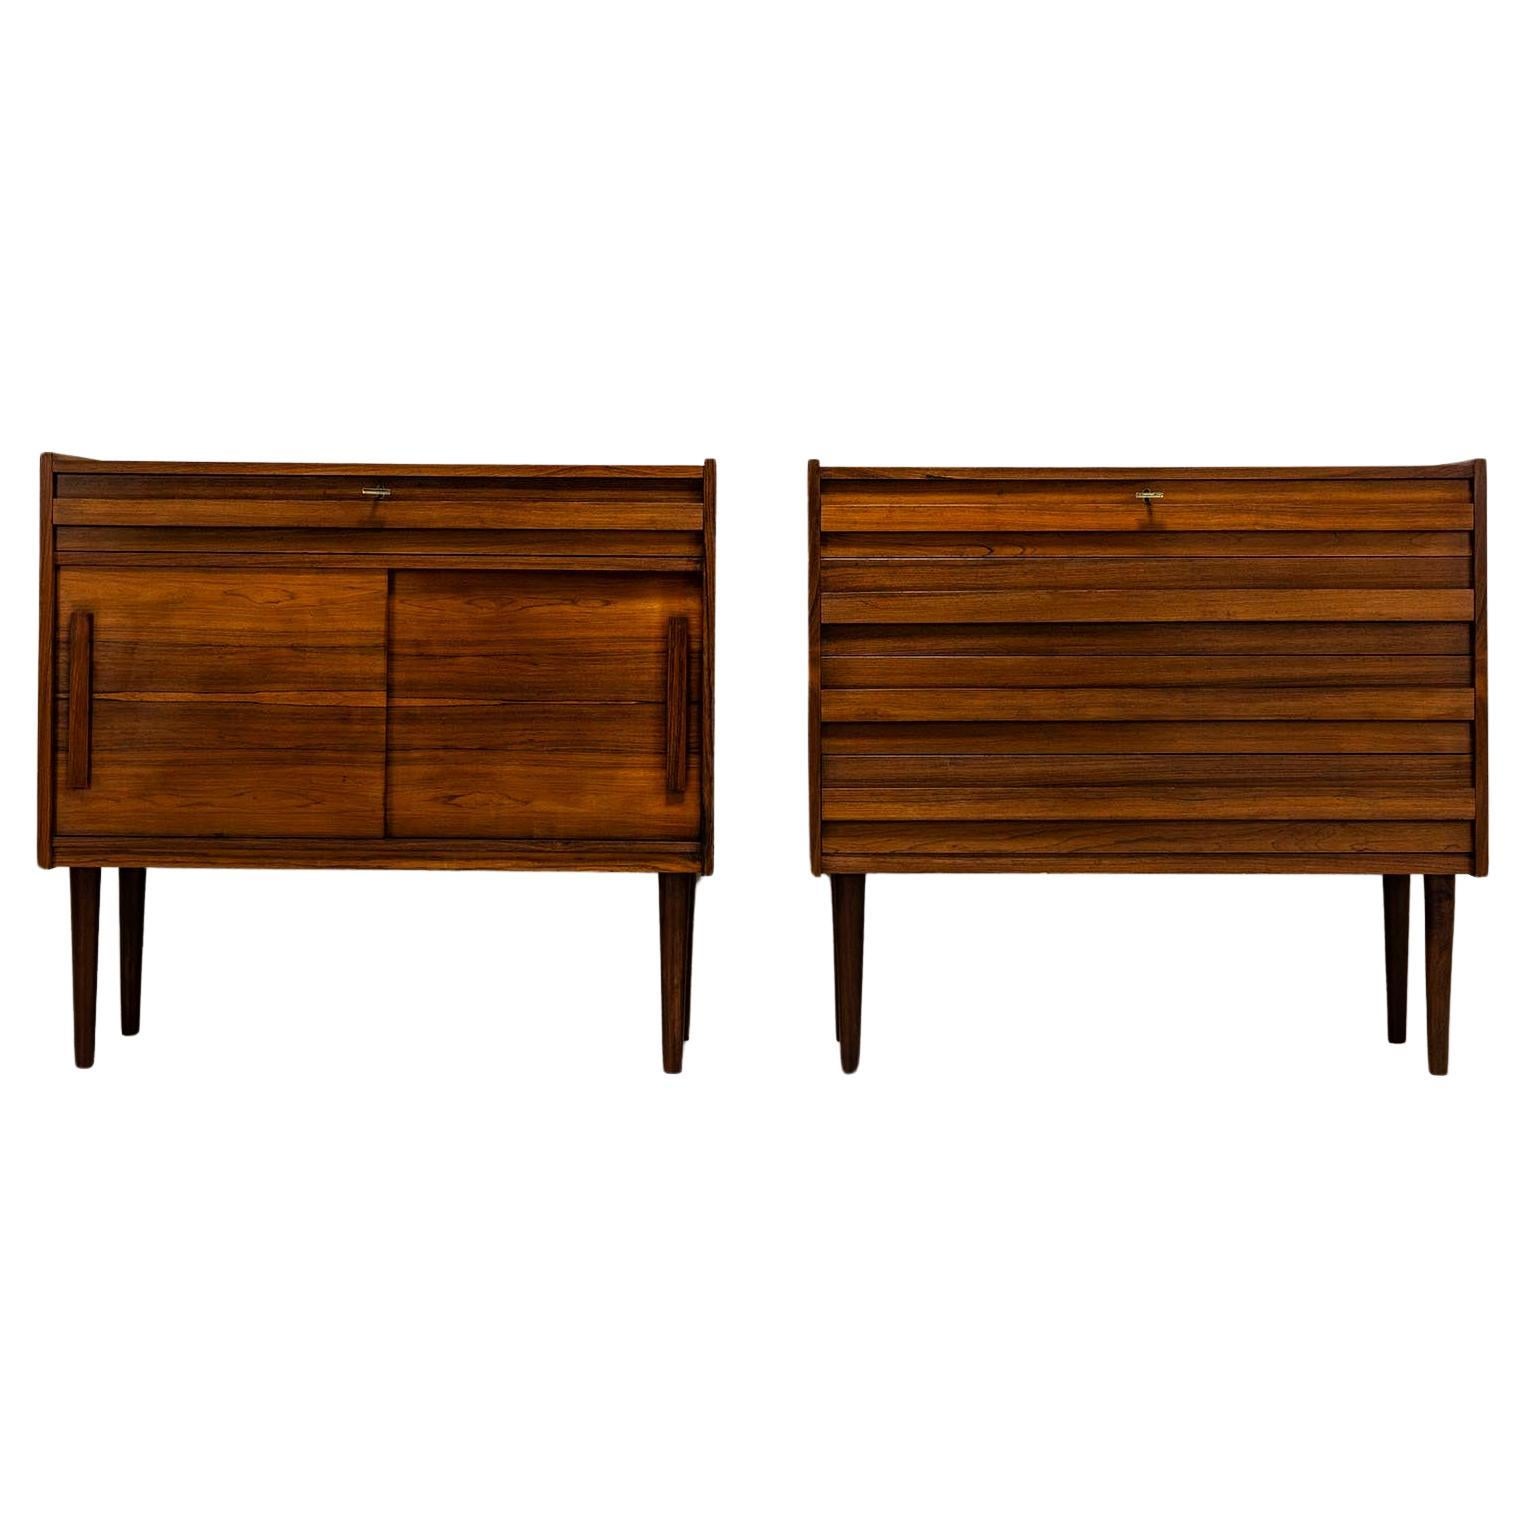 Set Of Two Vintage Cabinets In Veneered Rosewood, Denmark 1960s For Sale